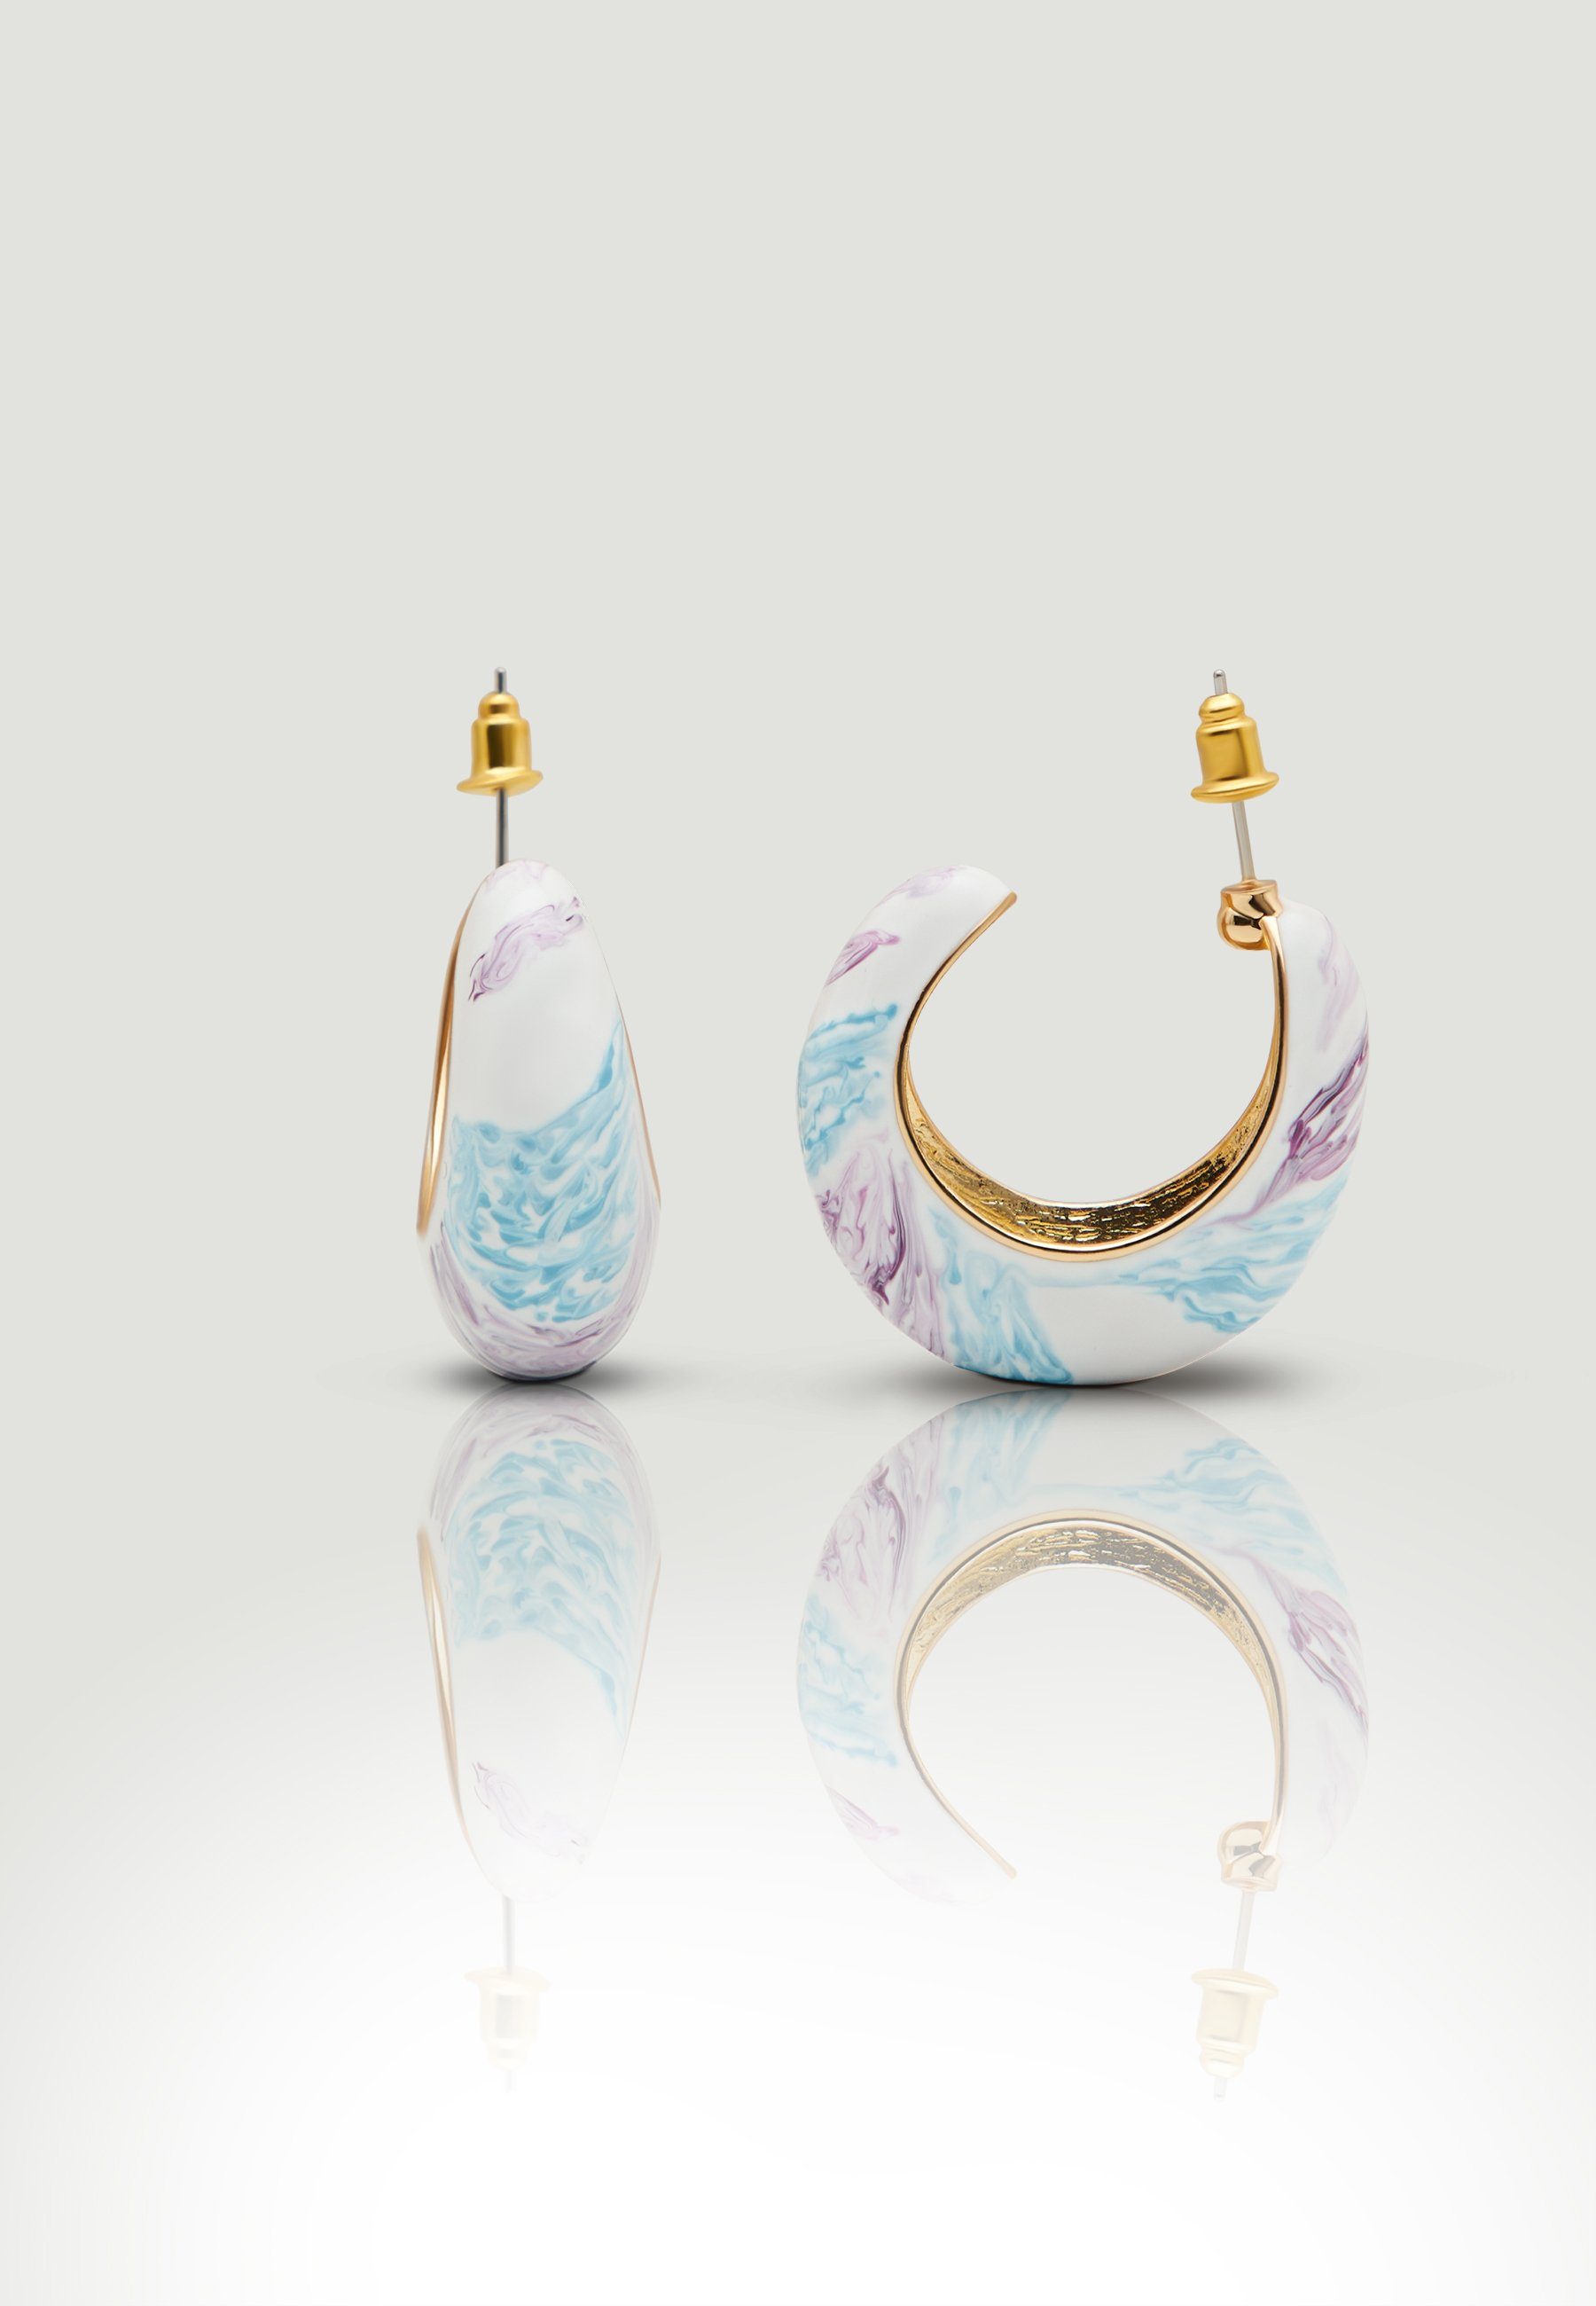 Mia, Marble Muster Plated Ohrring-Set Jane Gold White/Blue Tokyo und